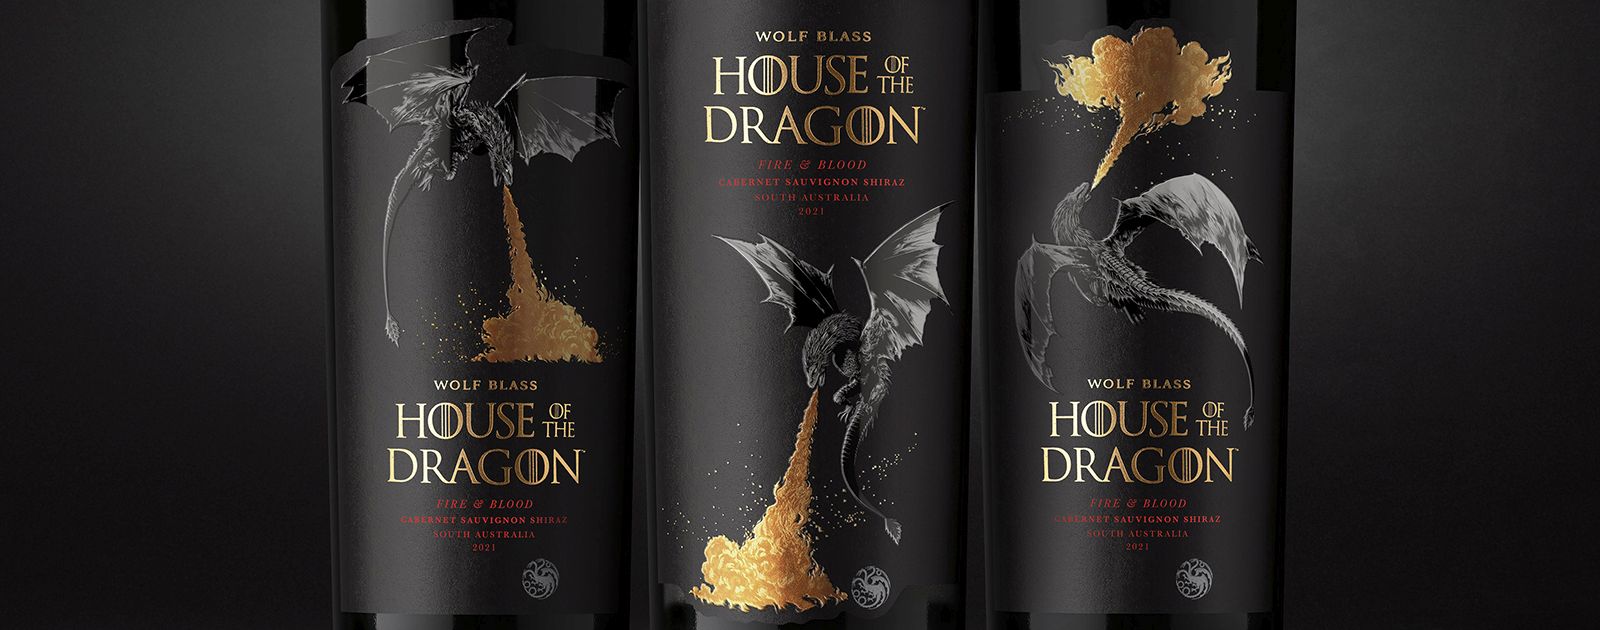 Wolf Blass Teams Up with Warner Bros. and HBO for Limited Edition 'House of the Dragon' Wines